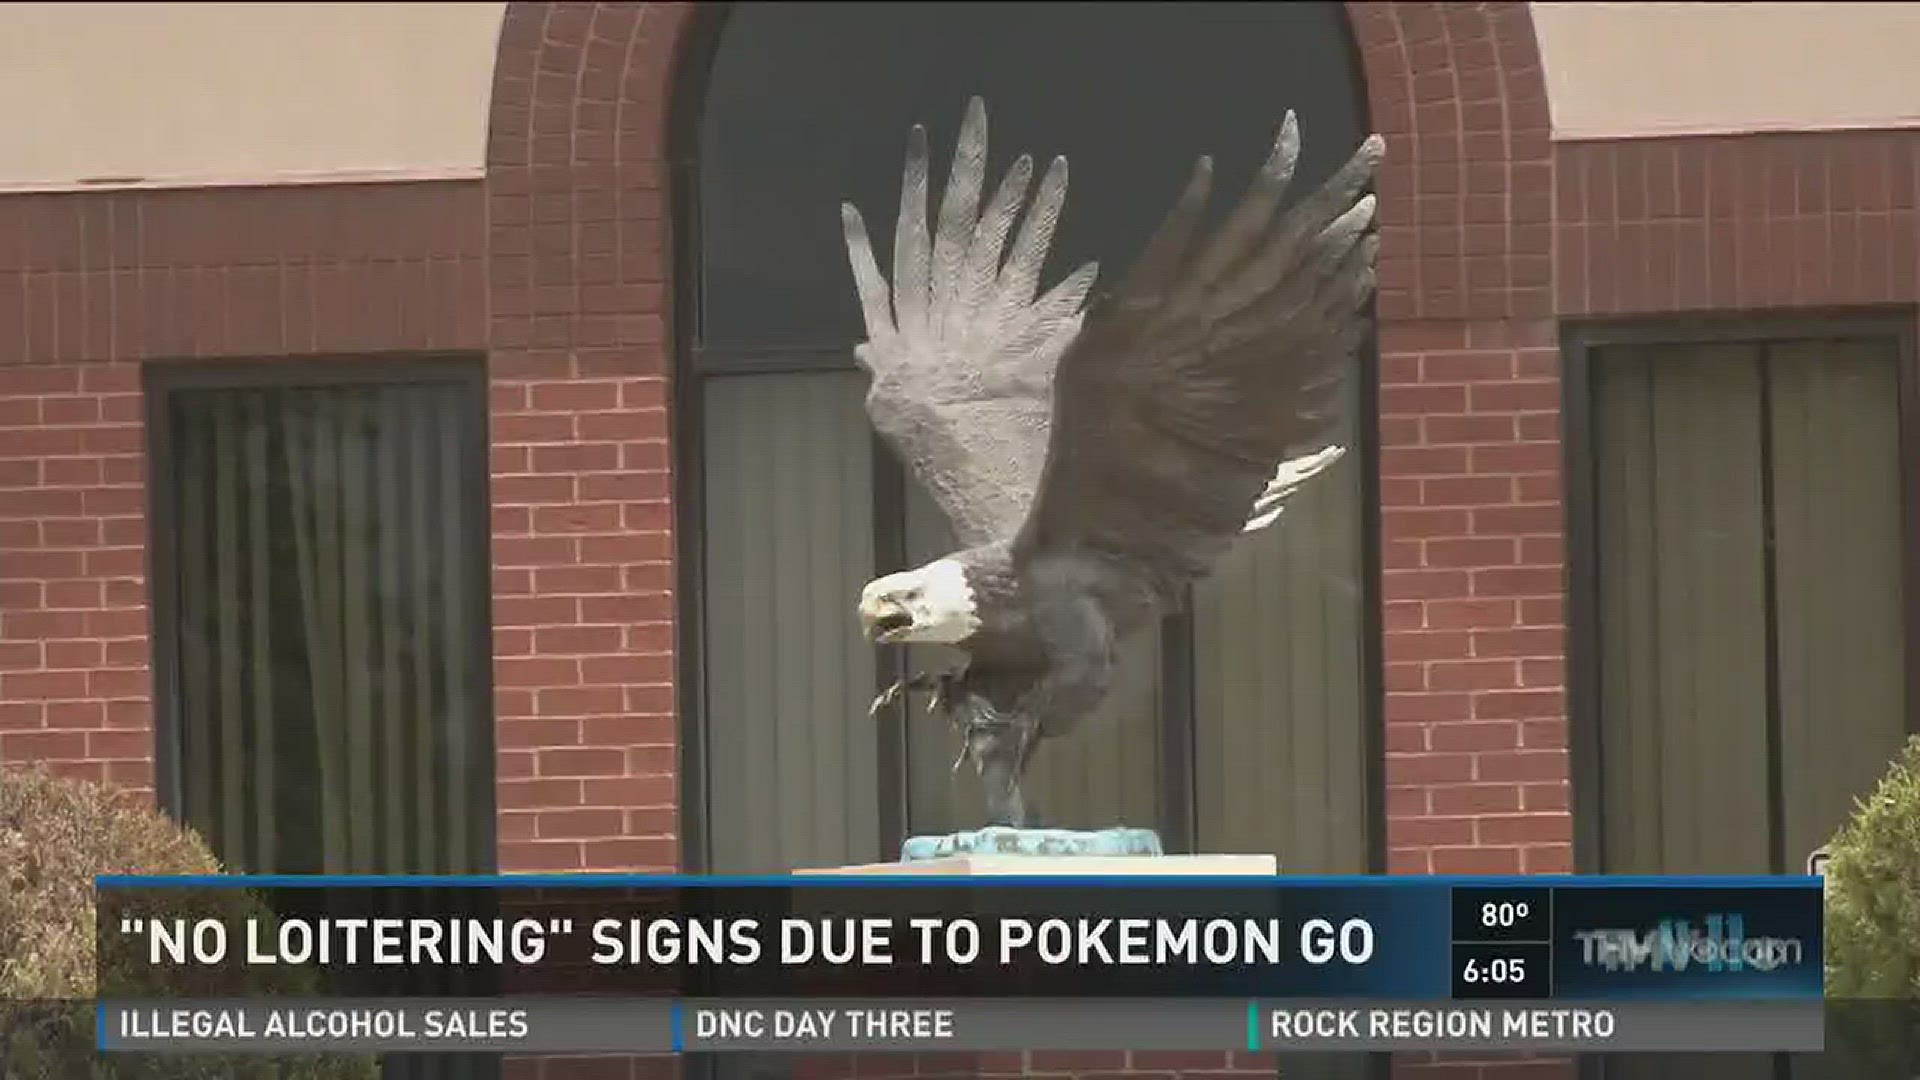 No Loitering signs due to Pokemon Go